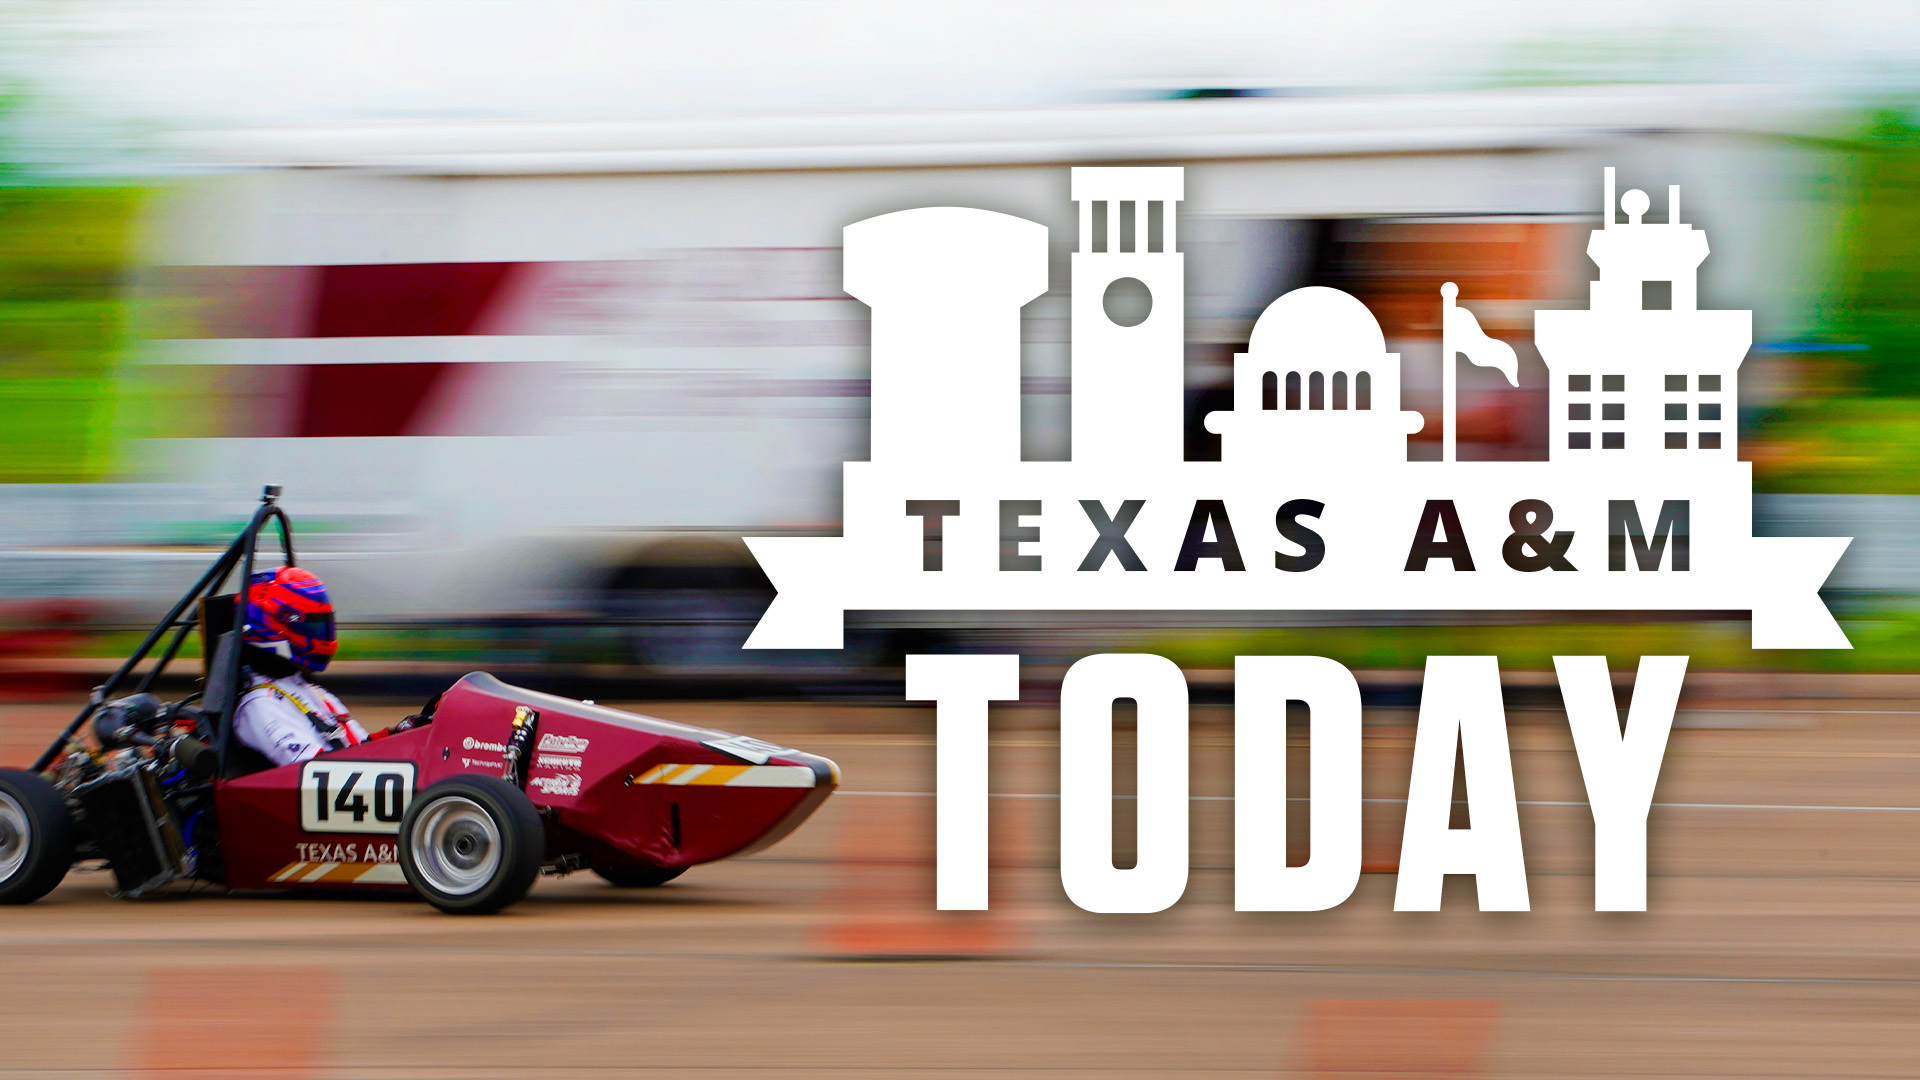 A race car drives past the camera with a logo for "Texas A&M Today."